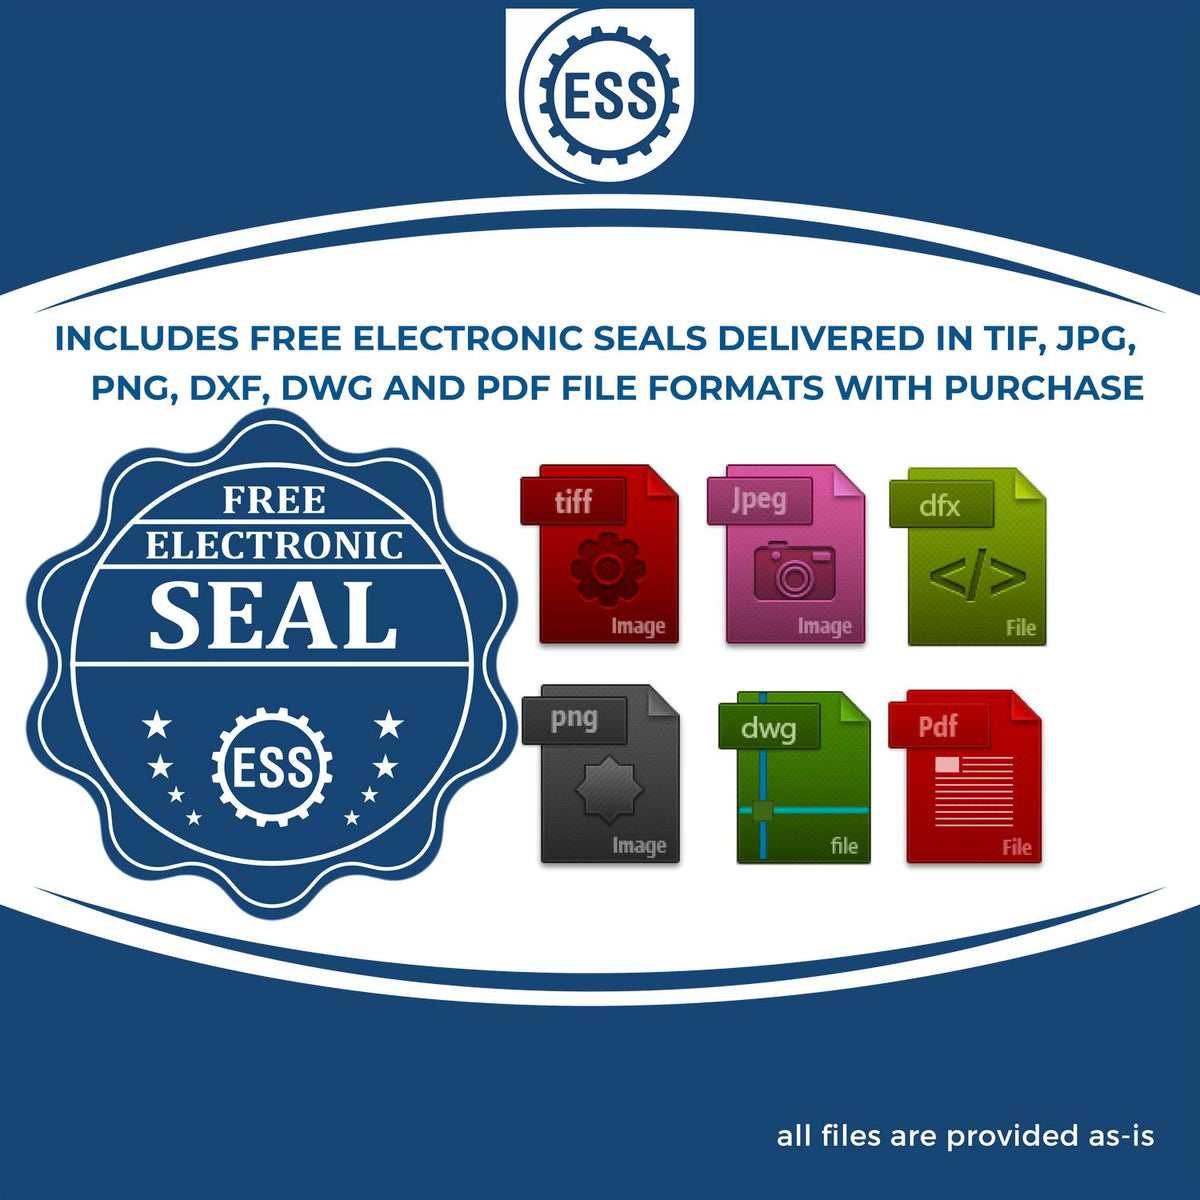 An infographic for the free electronic seal for the Slim Pre-Inked Connecticut Landscape Architect Seal Stamp illustrating the different file type icons such as DXF, DWG, TIF, JPG and PNG.